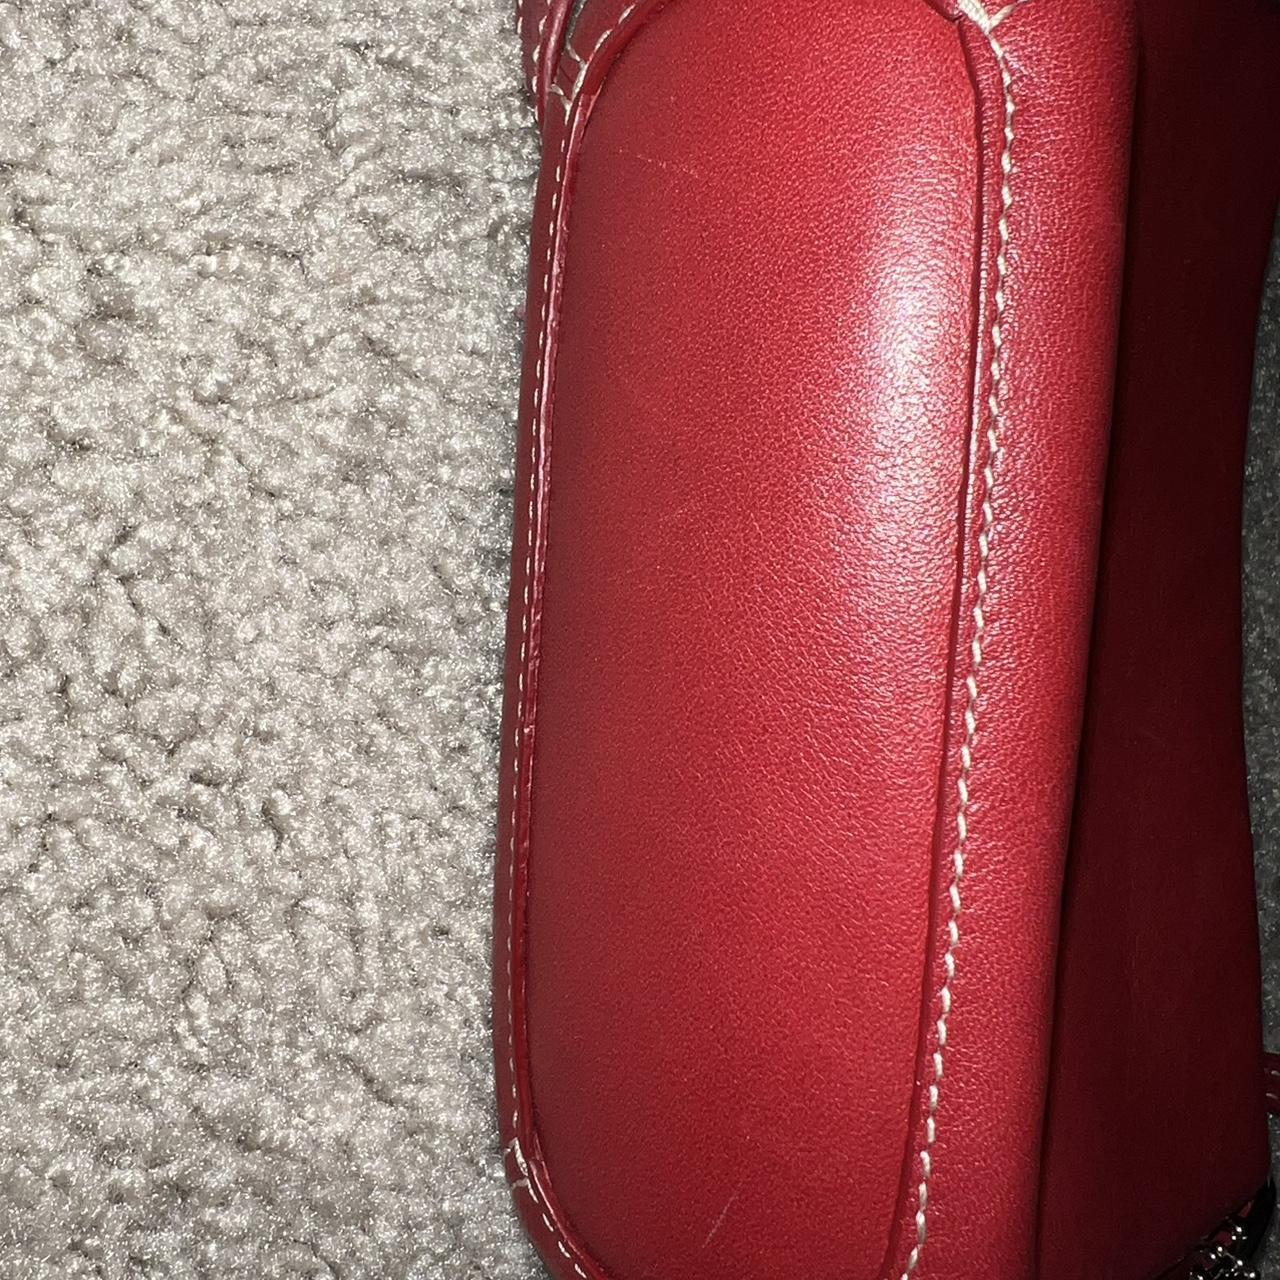 Coach City Saffiano Medium Sized Red Leather Tote - Depop